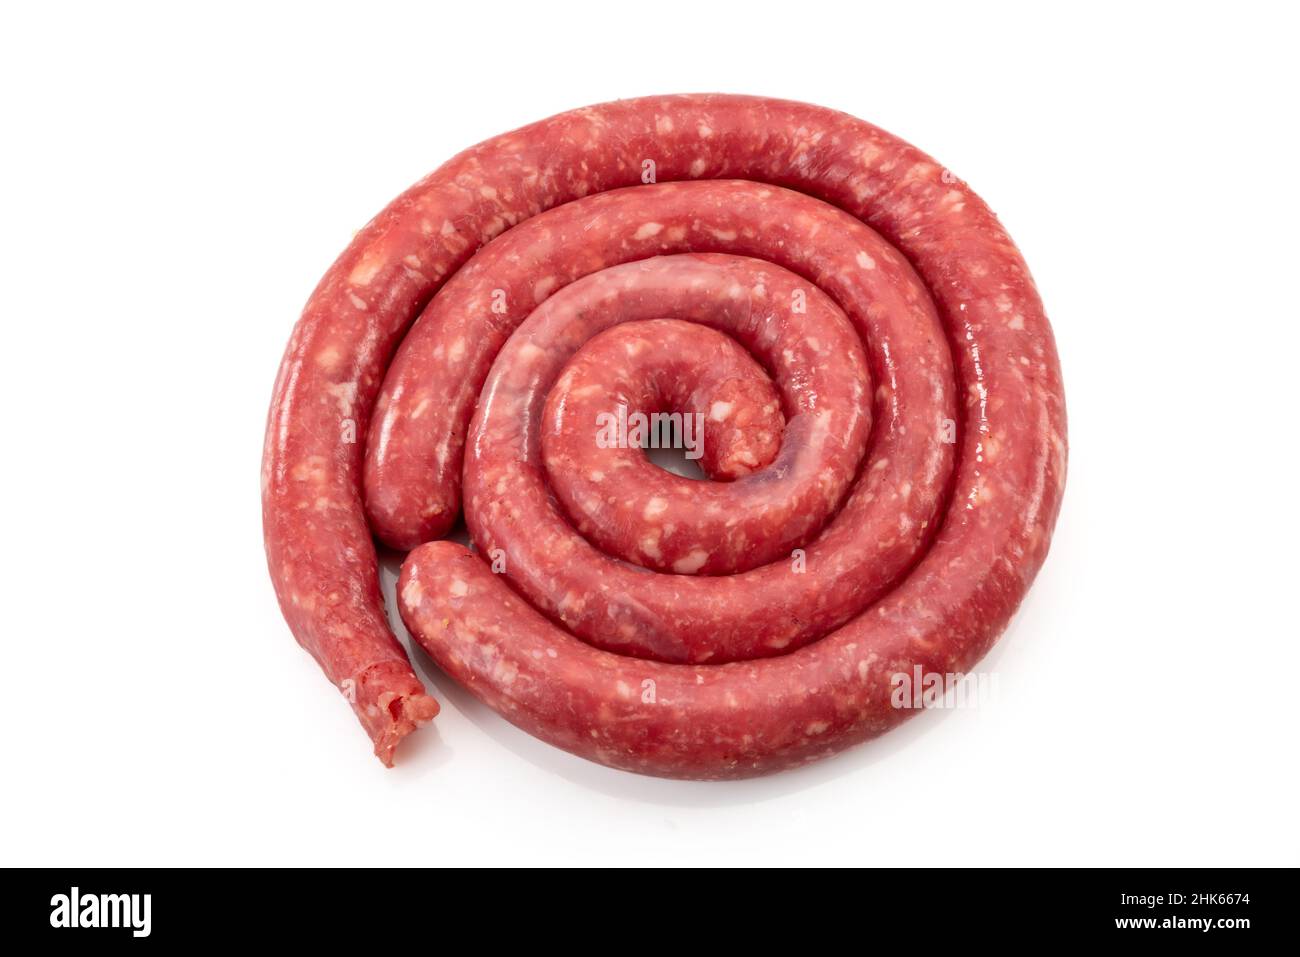 Sausage from Bra, Piedmont, Italy: sausage made with lean beef and pork belly. It is eaten raw or grilled Stock Photo